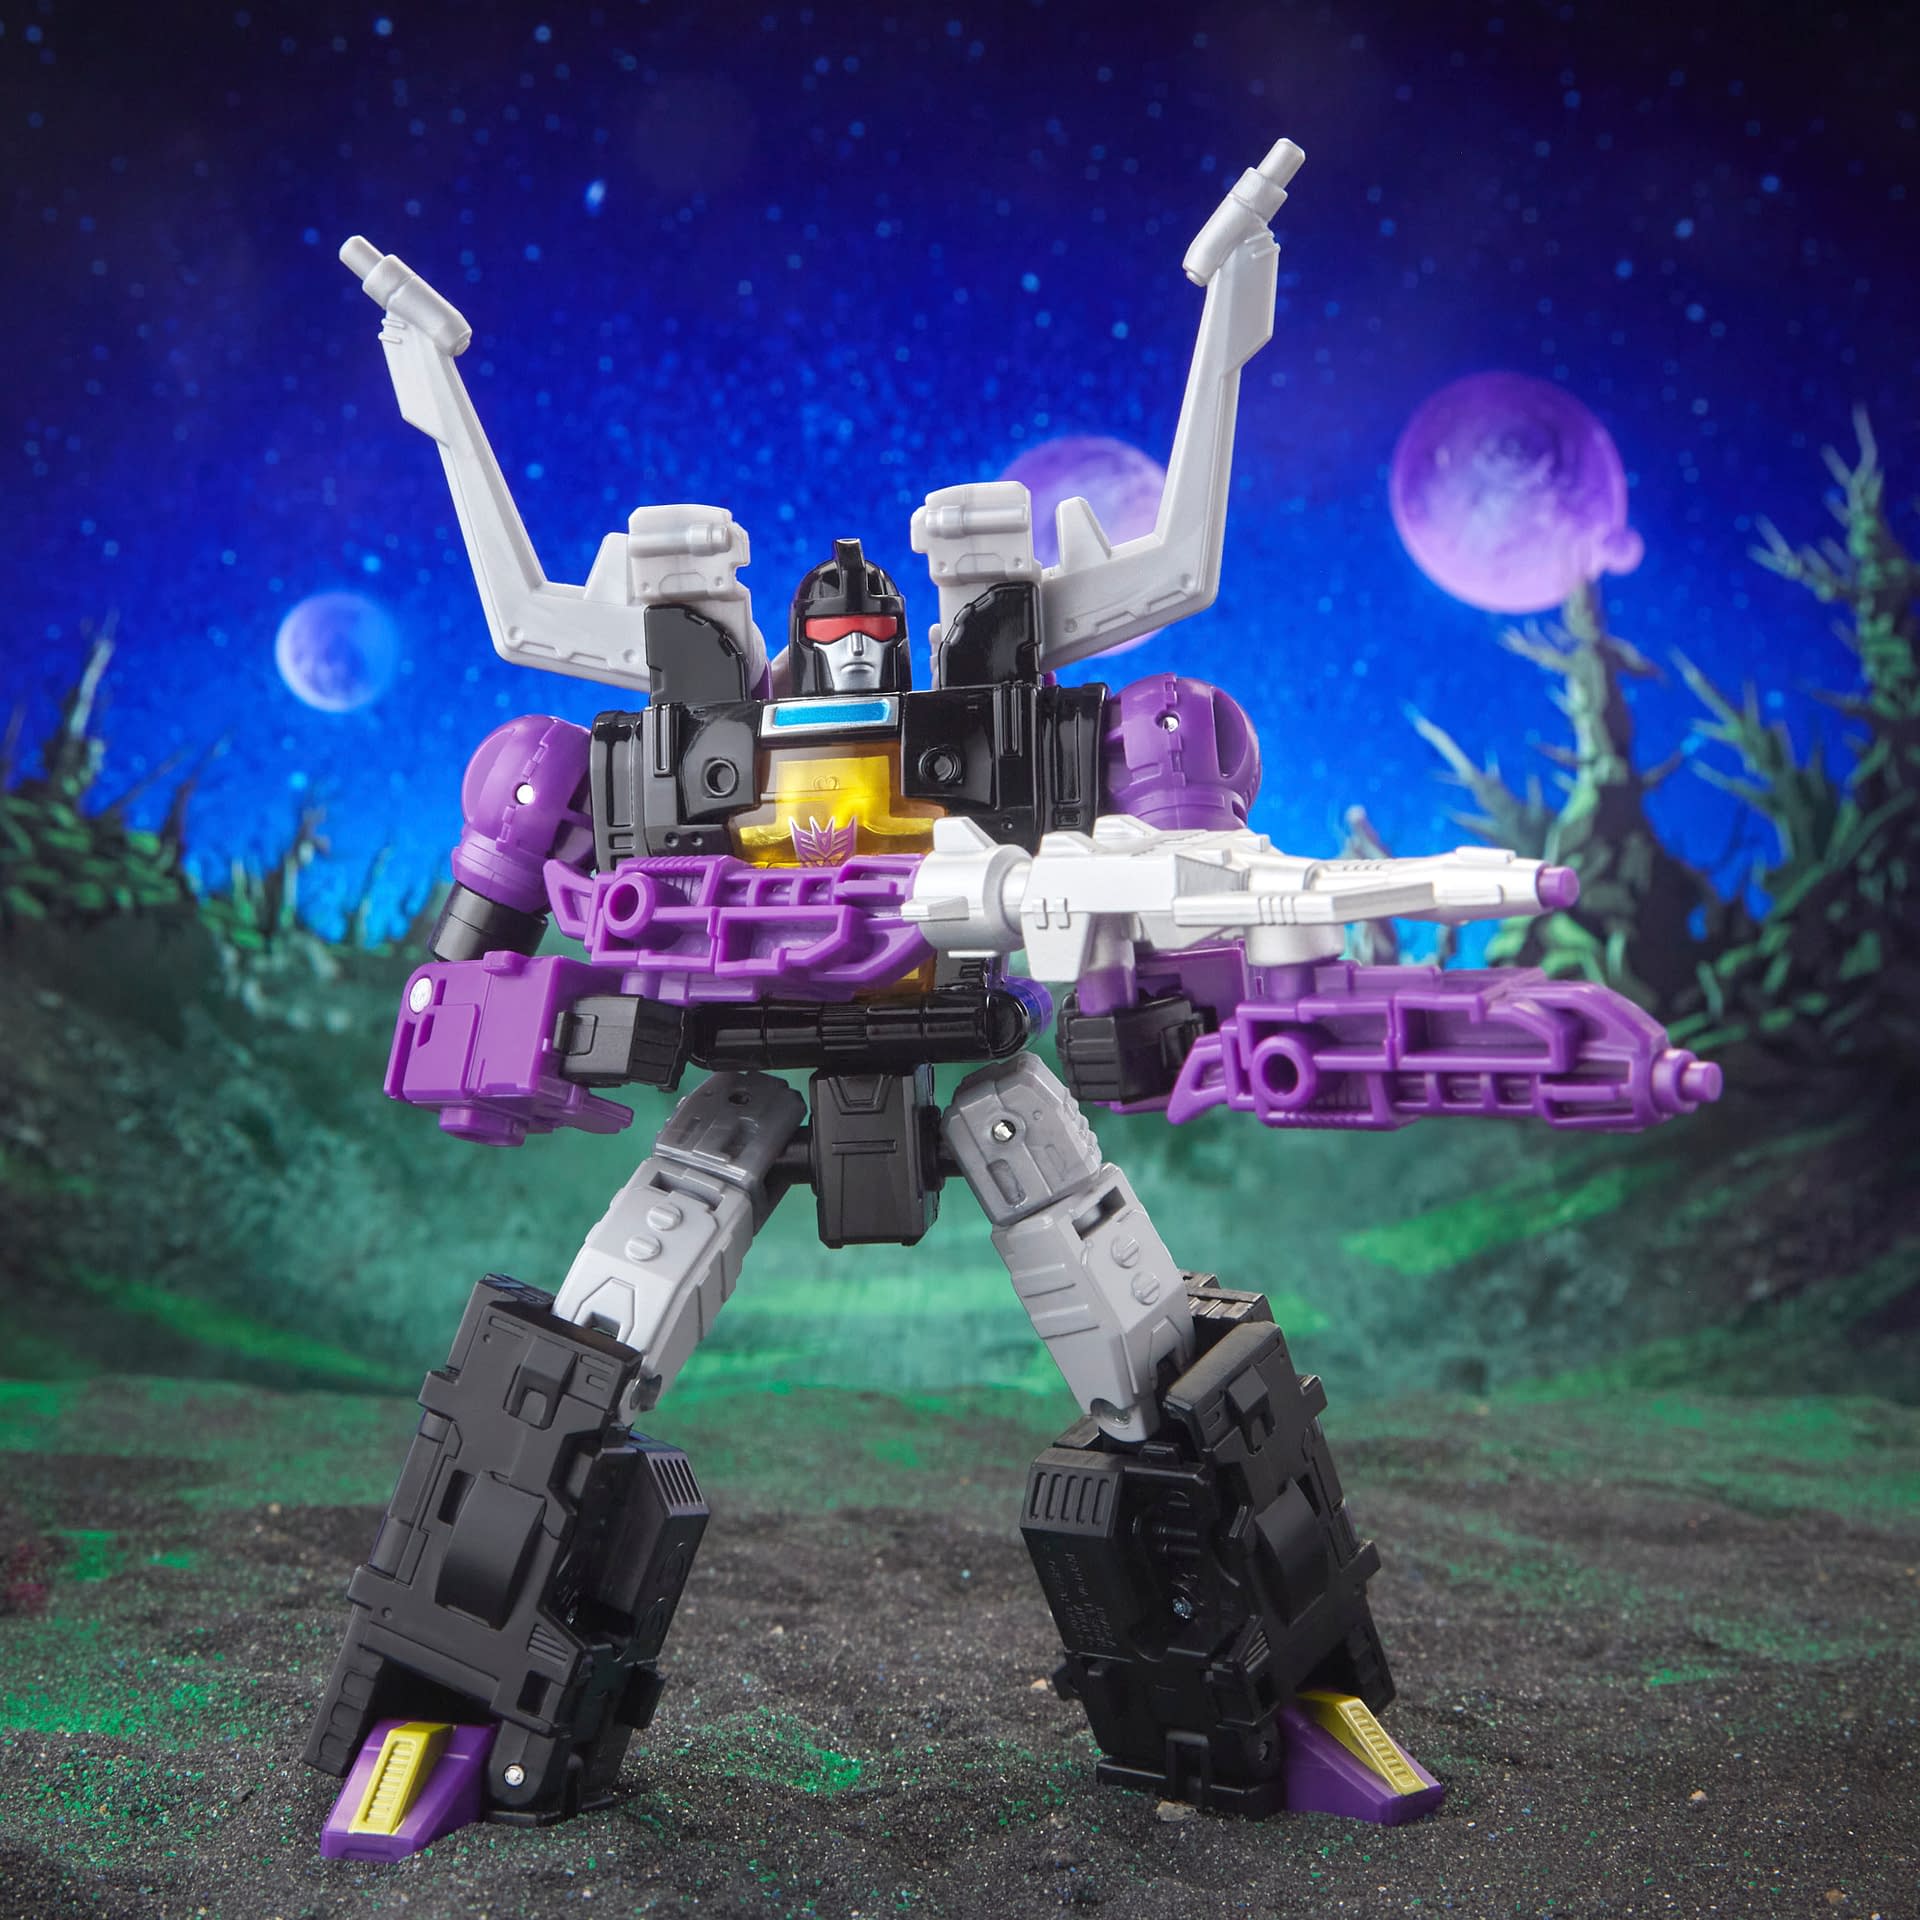 New Animated Transformers Legacy Figures Unveiled from Hasbro 